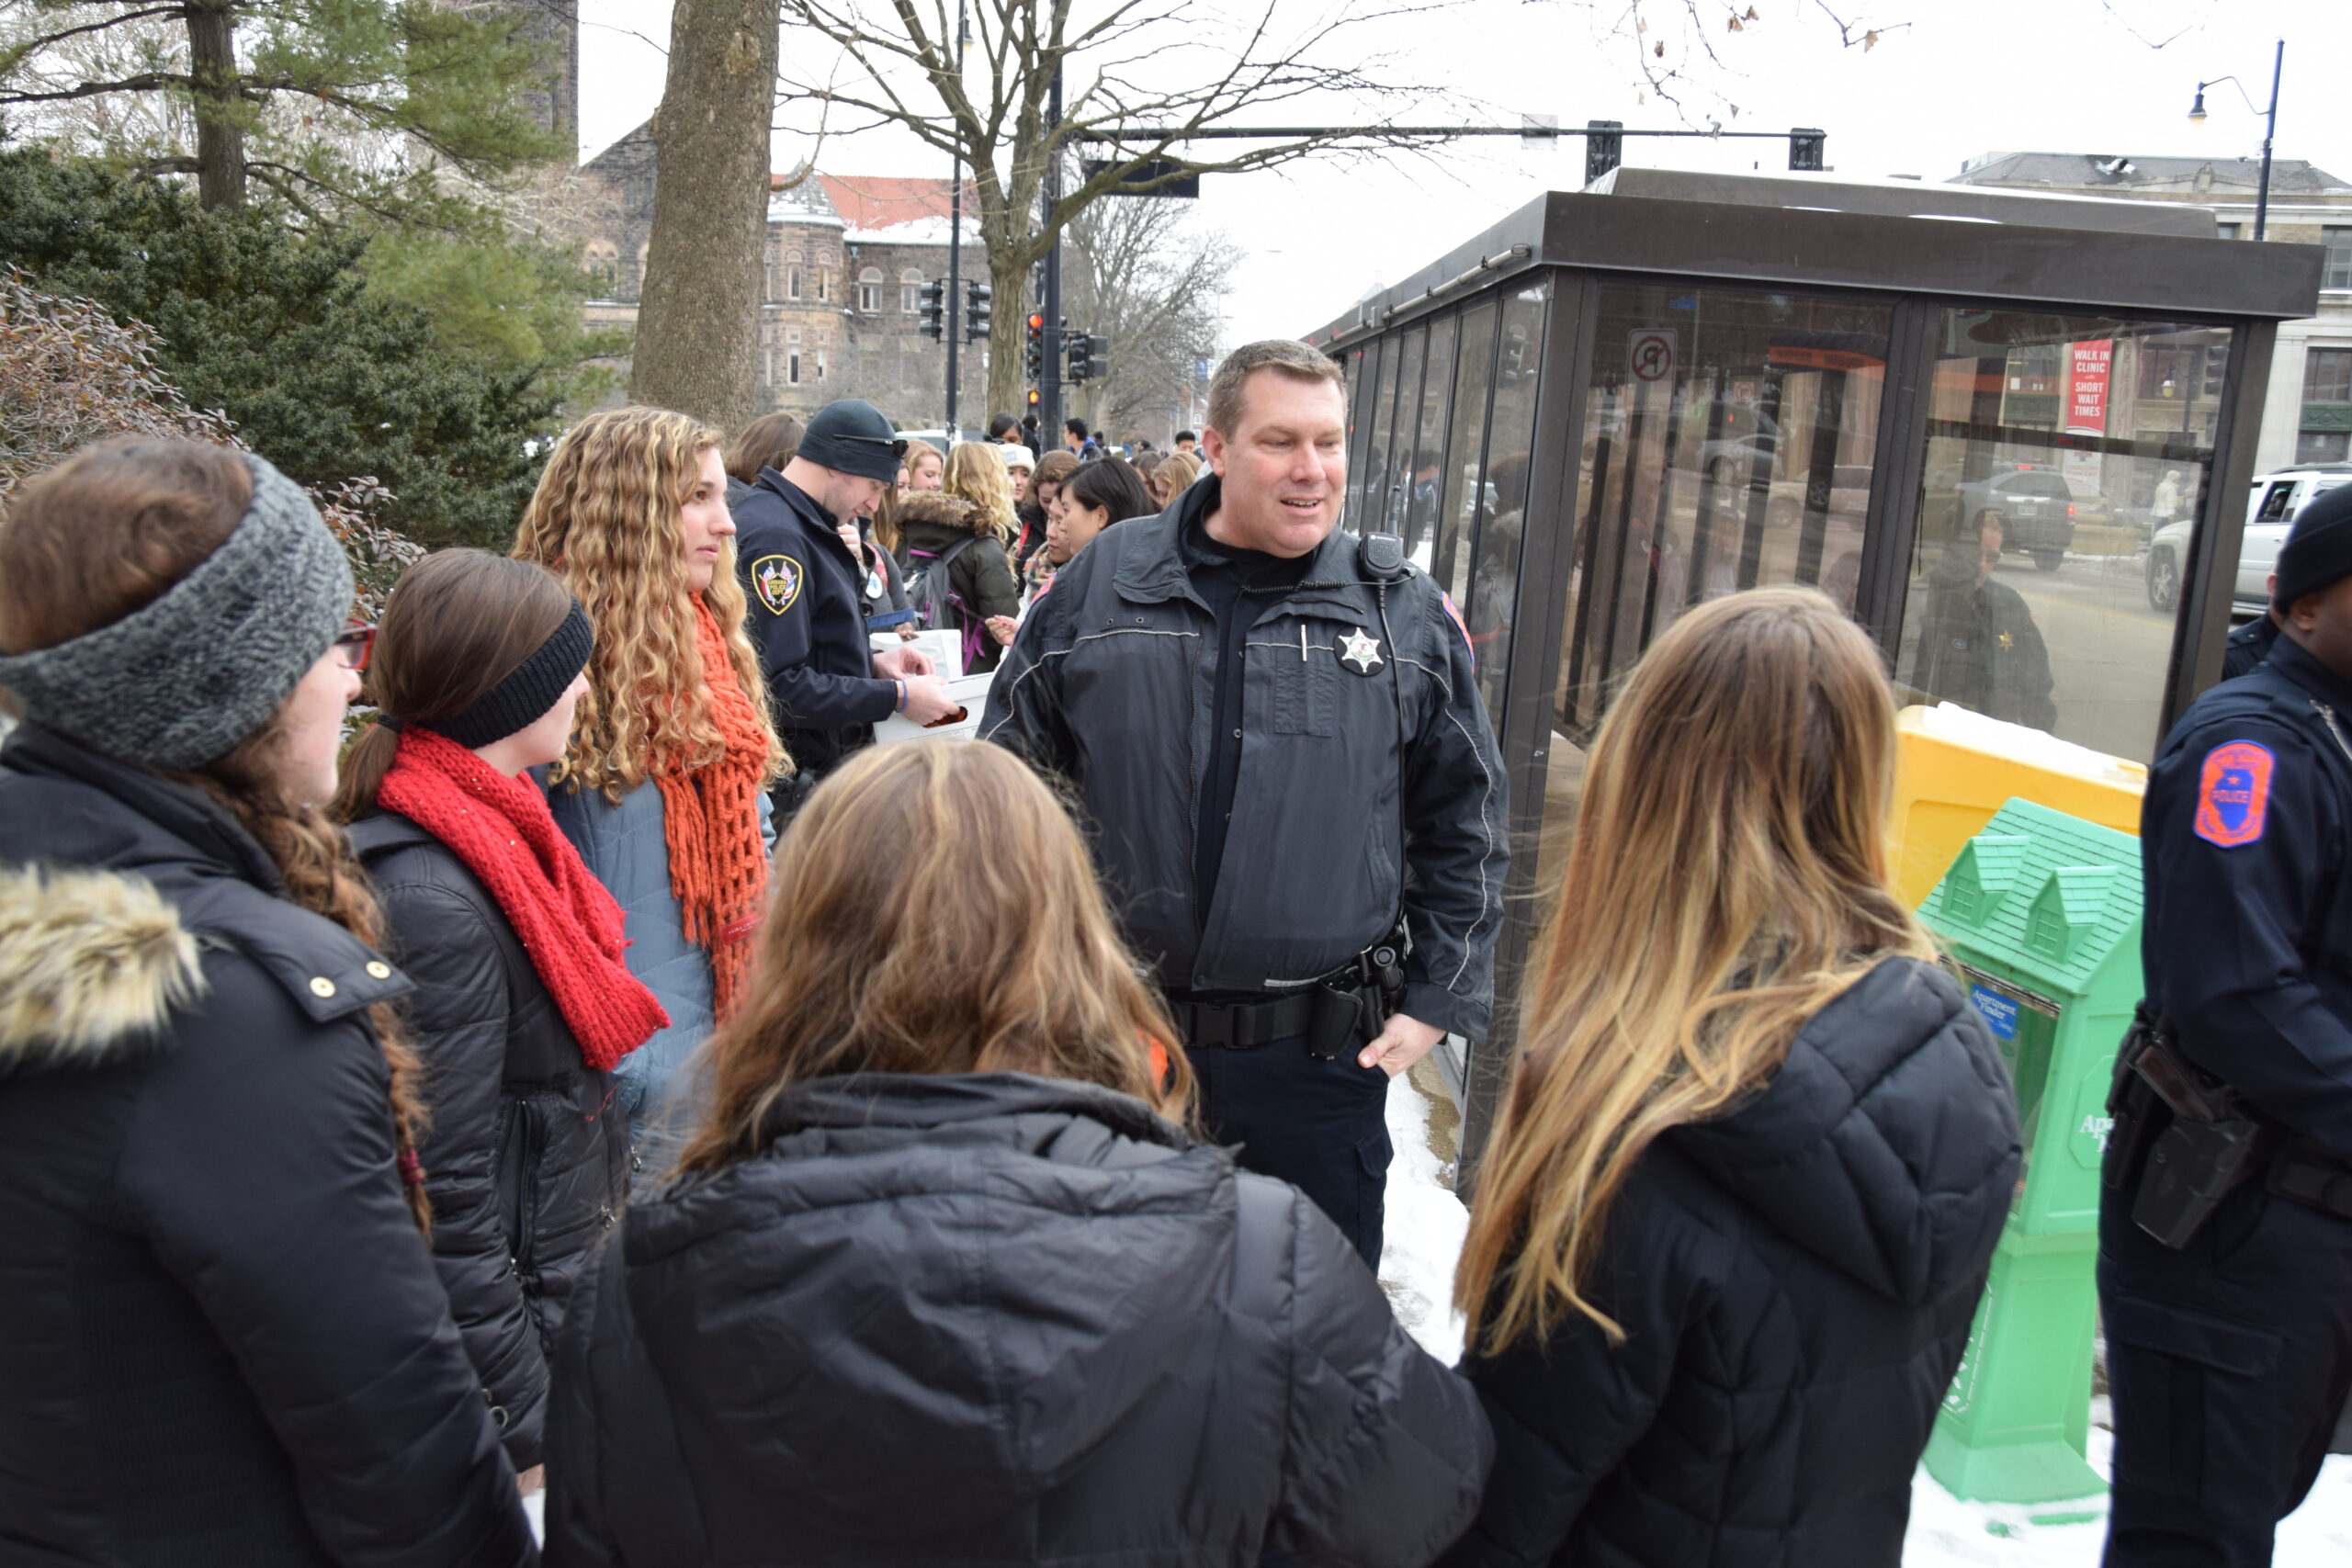 Detective Gene Moore speaks with students during a Walk As One event in 2015, when police and students joined forces to deliver important safety information to campus community members.